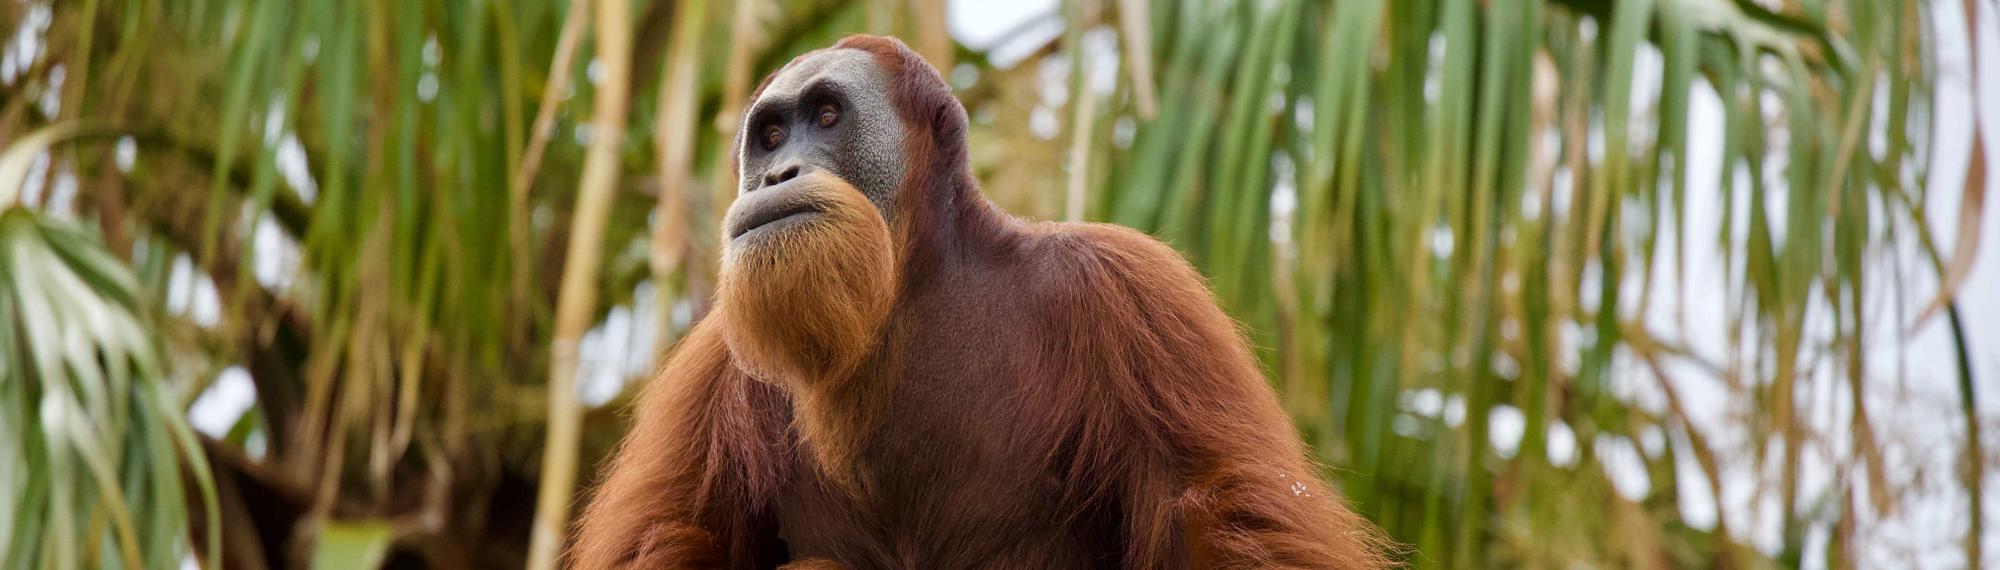 An adult Orangutan, with long orange hair, gazes into the distance. Green palm trees in the background